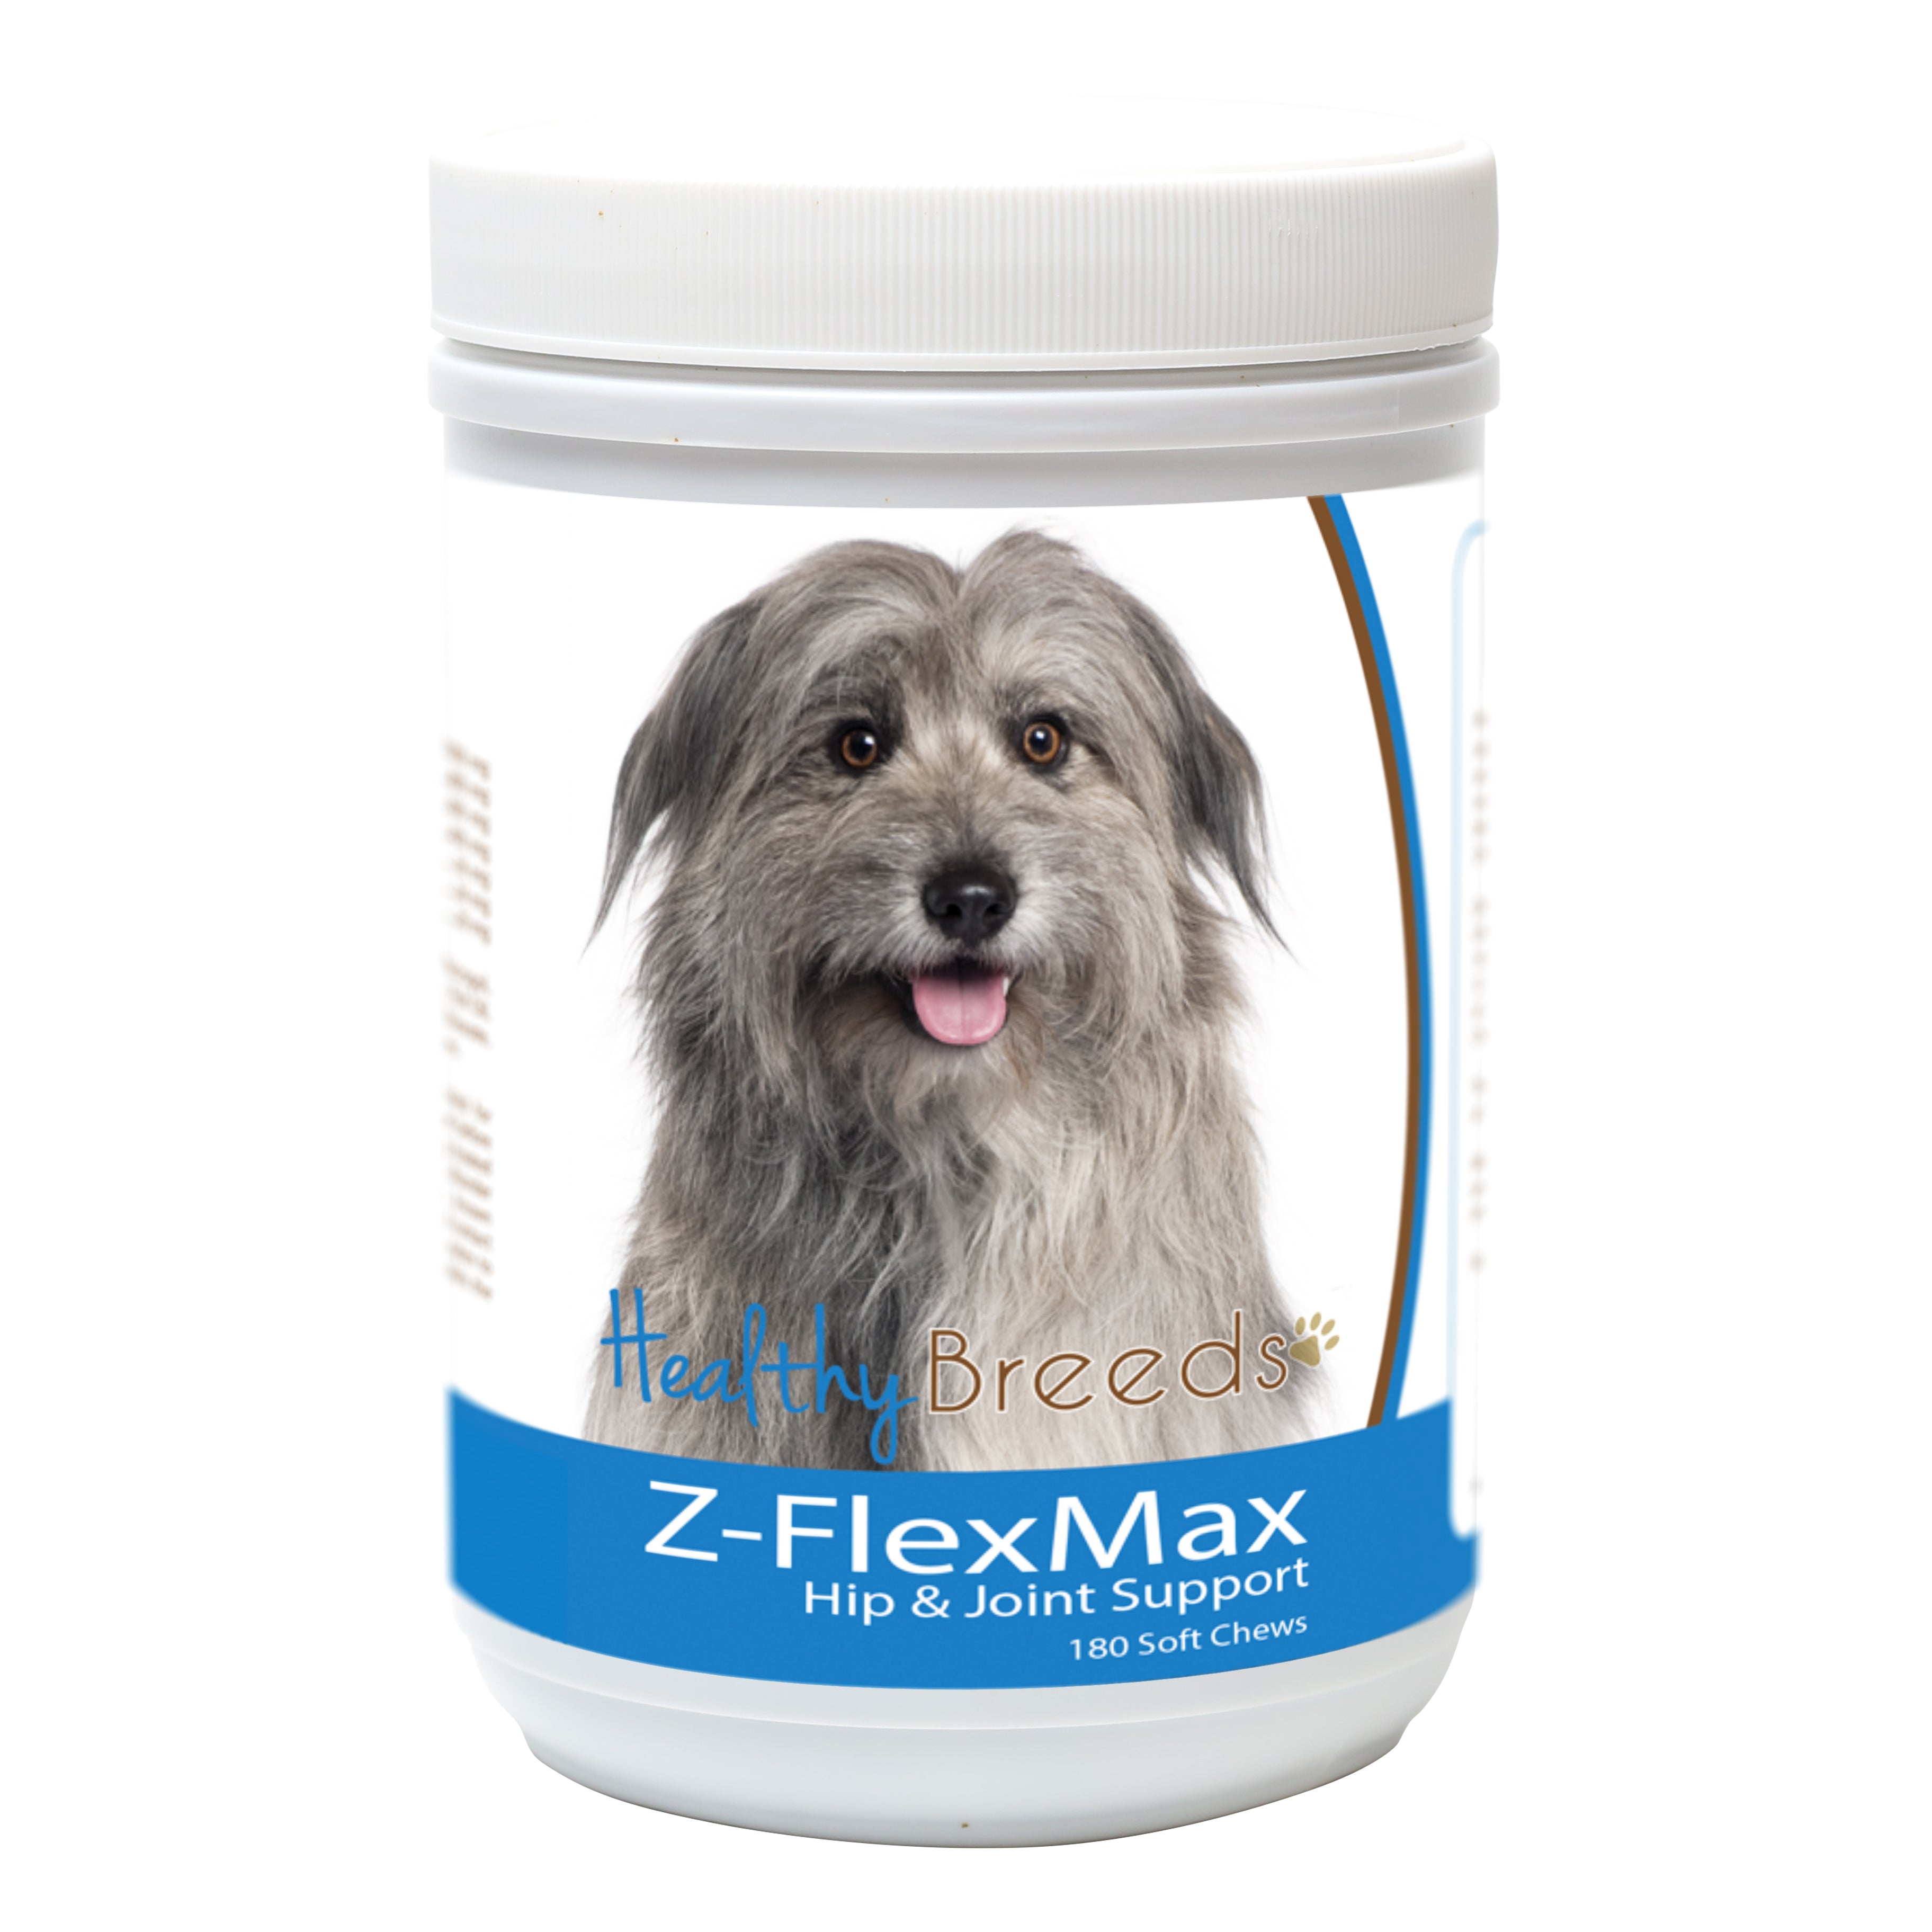 Pyrenean Shepherd Z-Flex Max Dog Hip and Joint Support 180 Count